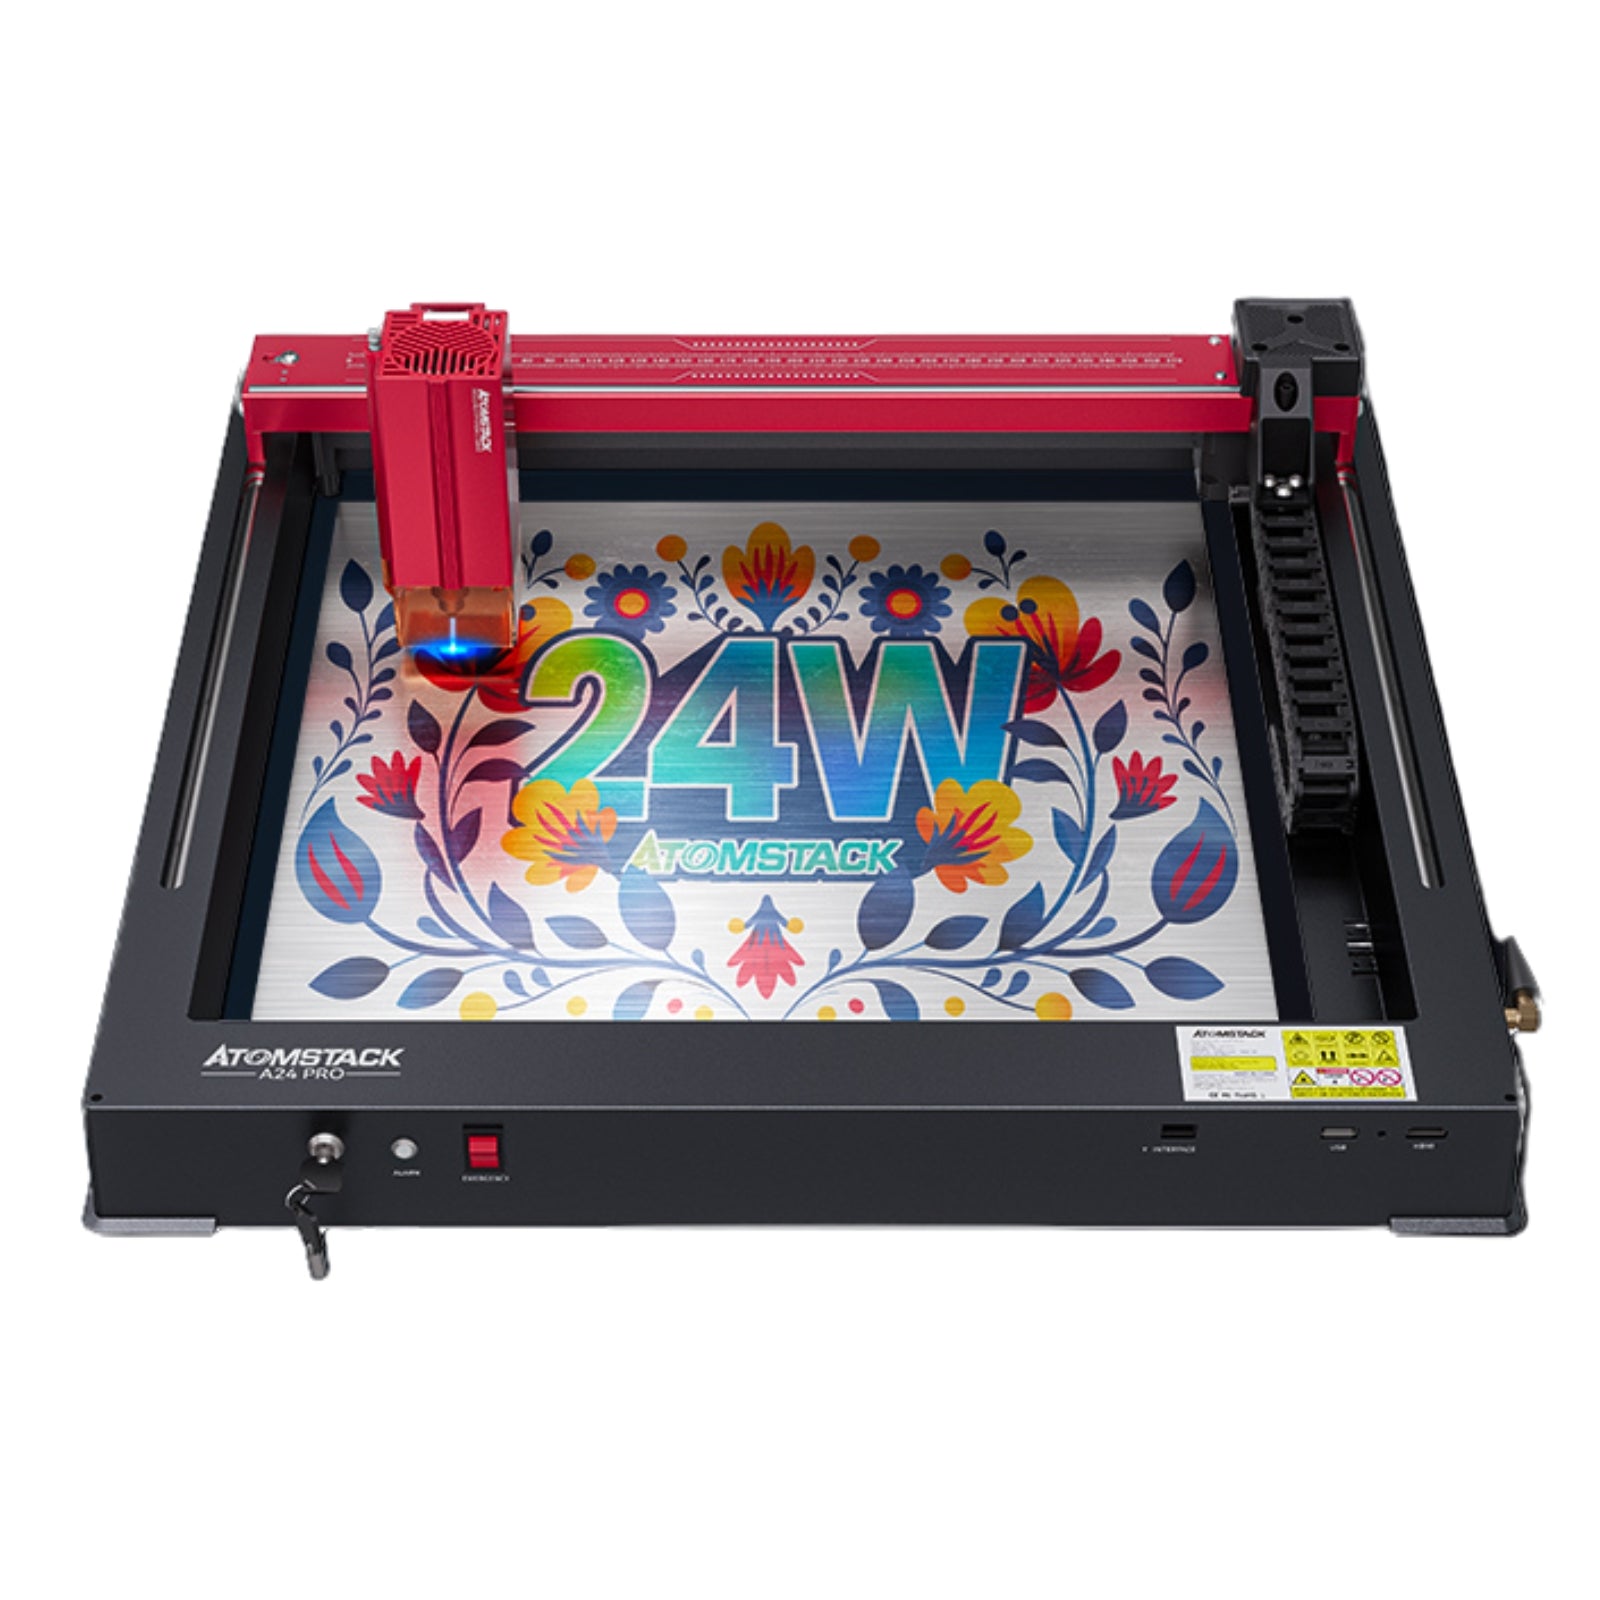 AtomStack A24 Pro / X24 PRO is the world's first 24W unibody frame laser engraver and cutter. It is perfect for wood, leather, acrylic engraving and cutting. The unique unibody frame design allows users begin their project within 5 minutes.